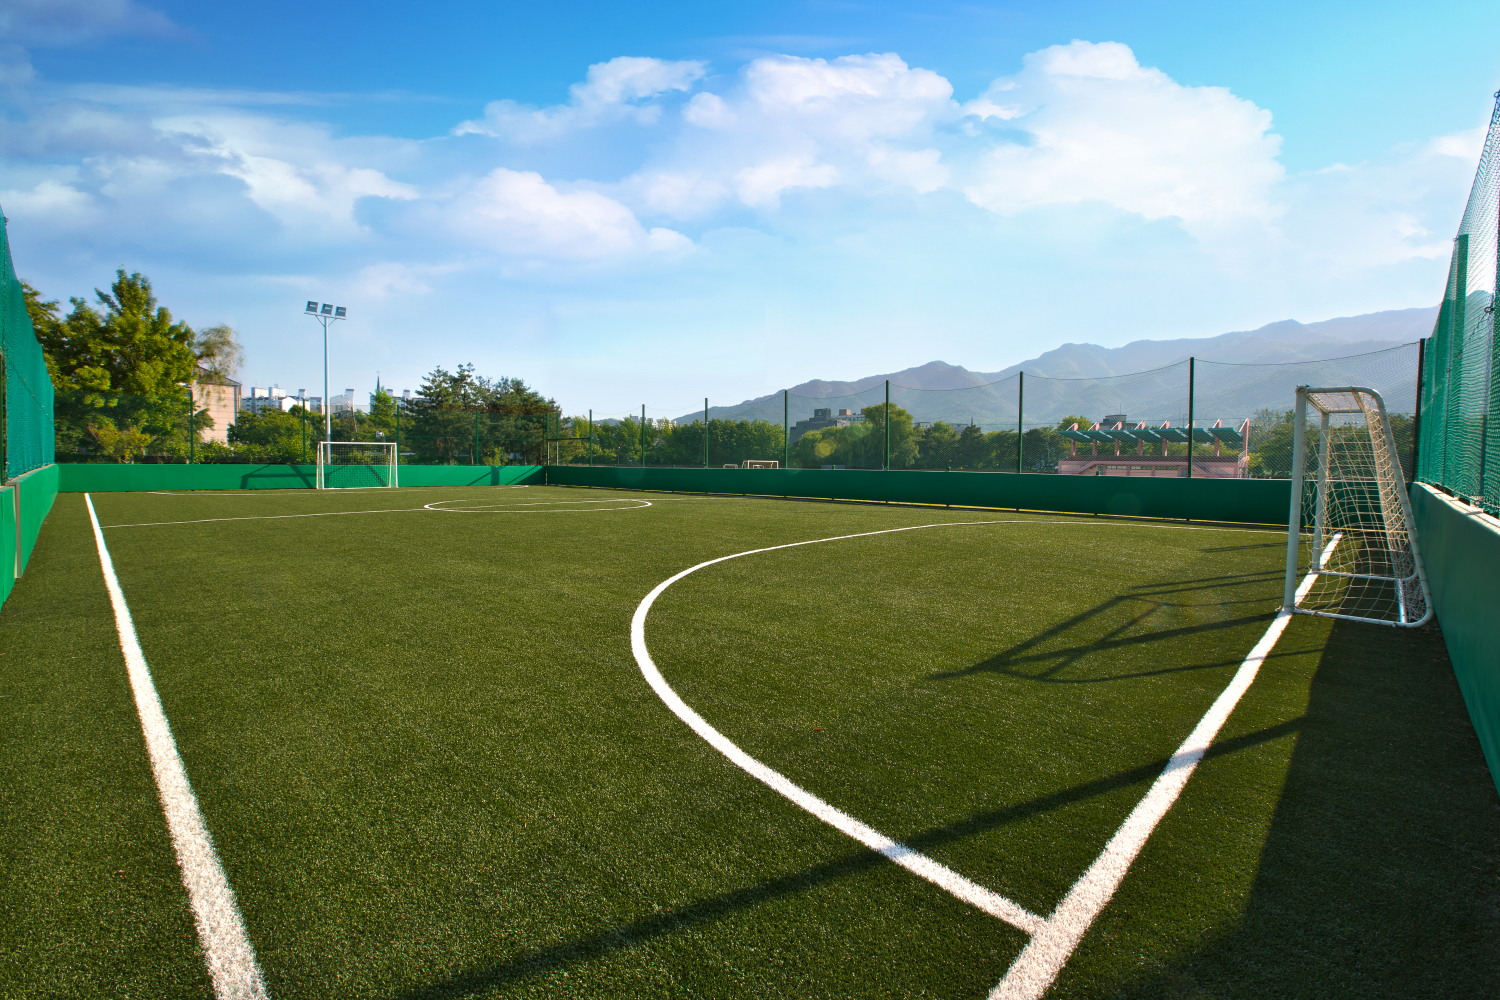   HIDDINK DREAM FIELD   Hiddink Dream Field is a project for establishment of the futsal fields for visually handicapped people.   Learn more  